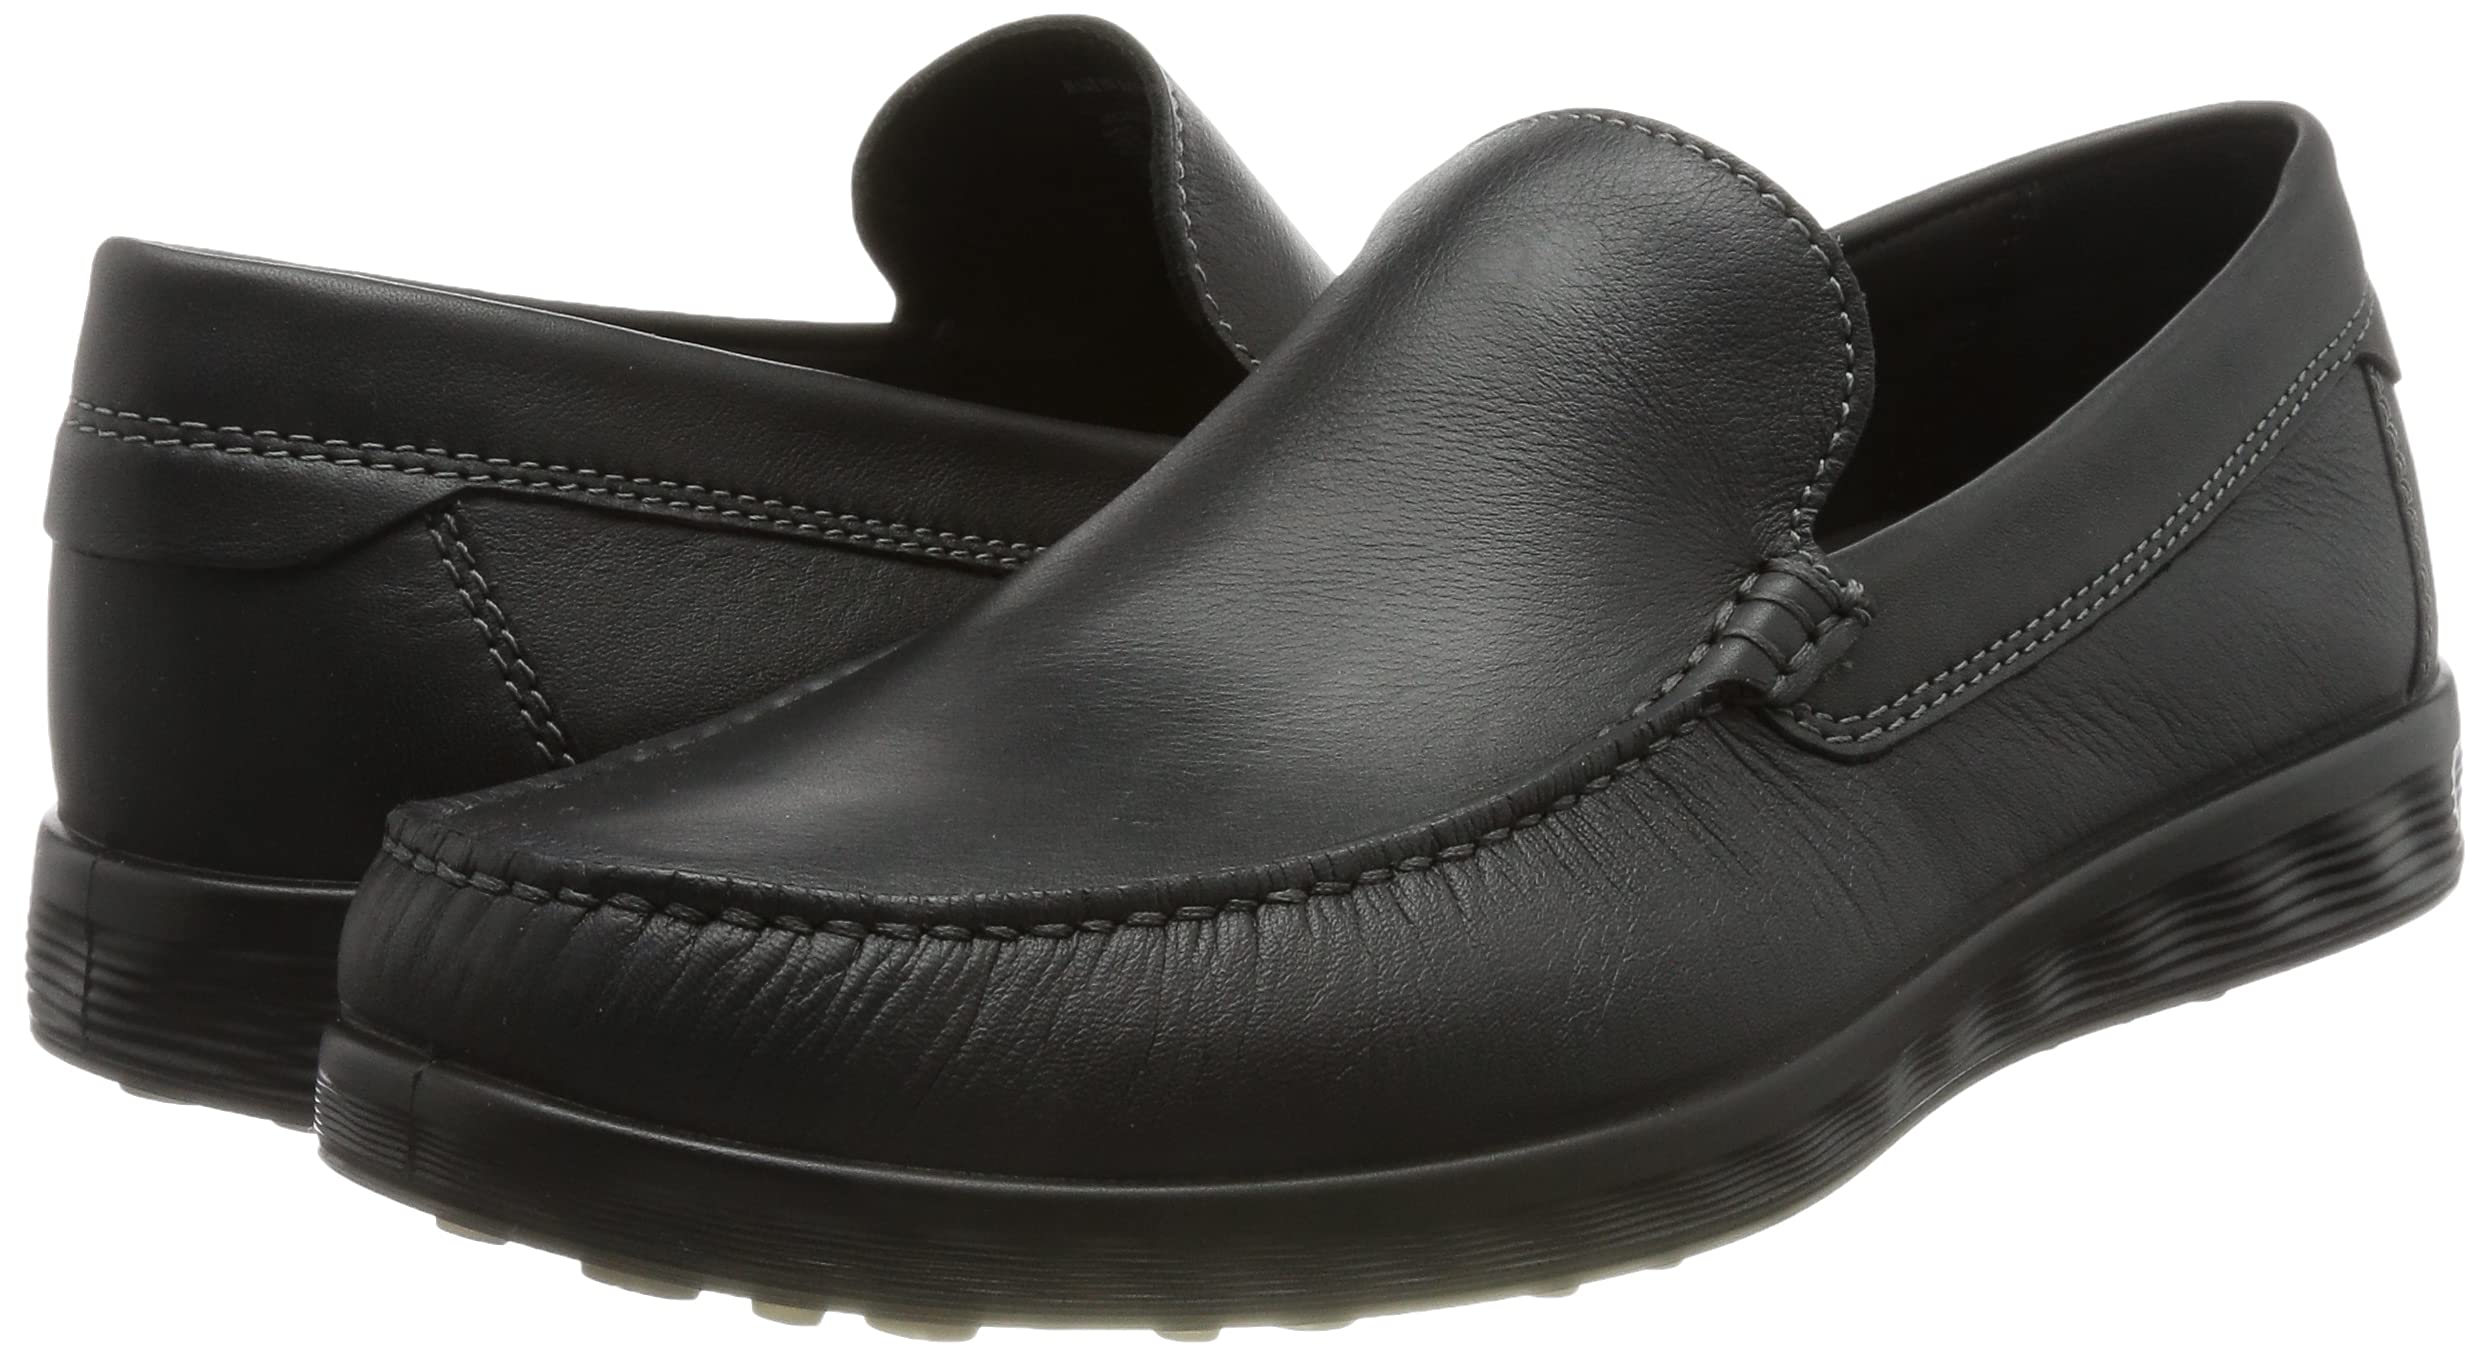 ECCO Men's S Lite Moc Classic Driving Style Loafer